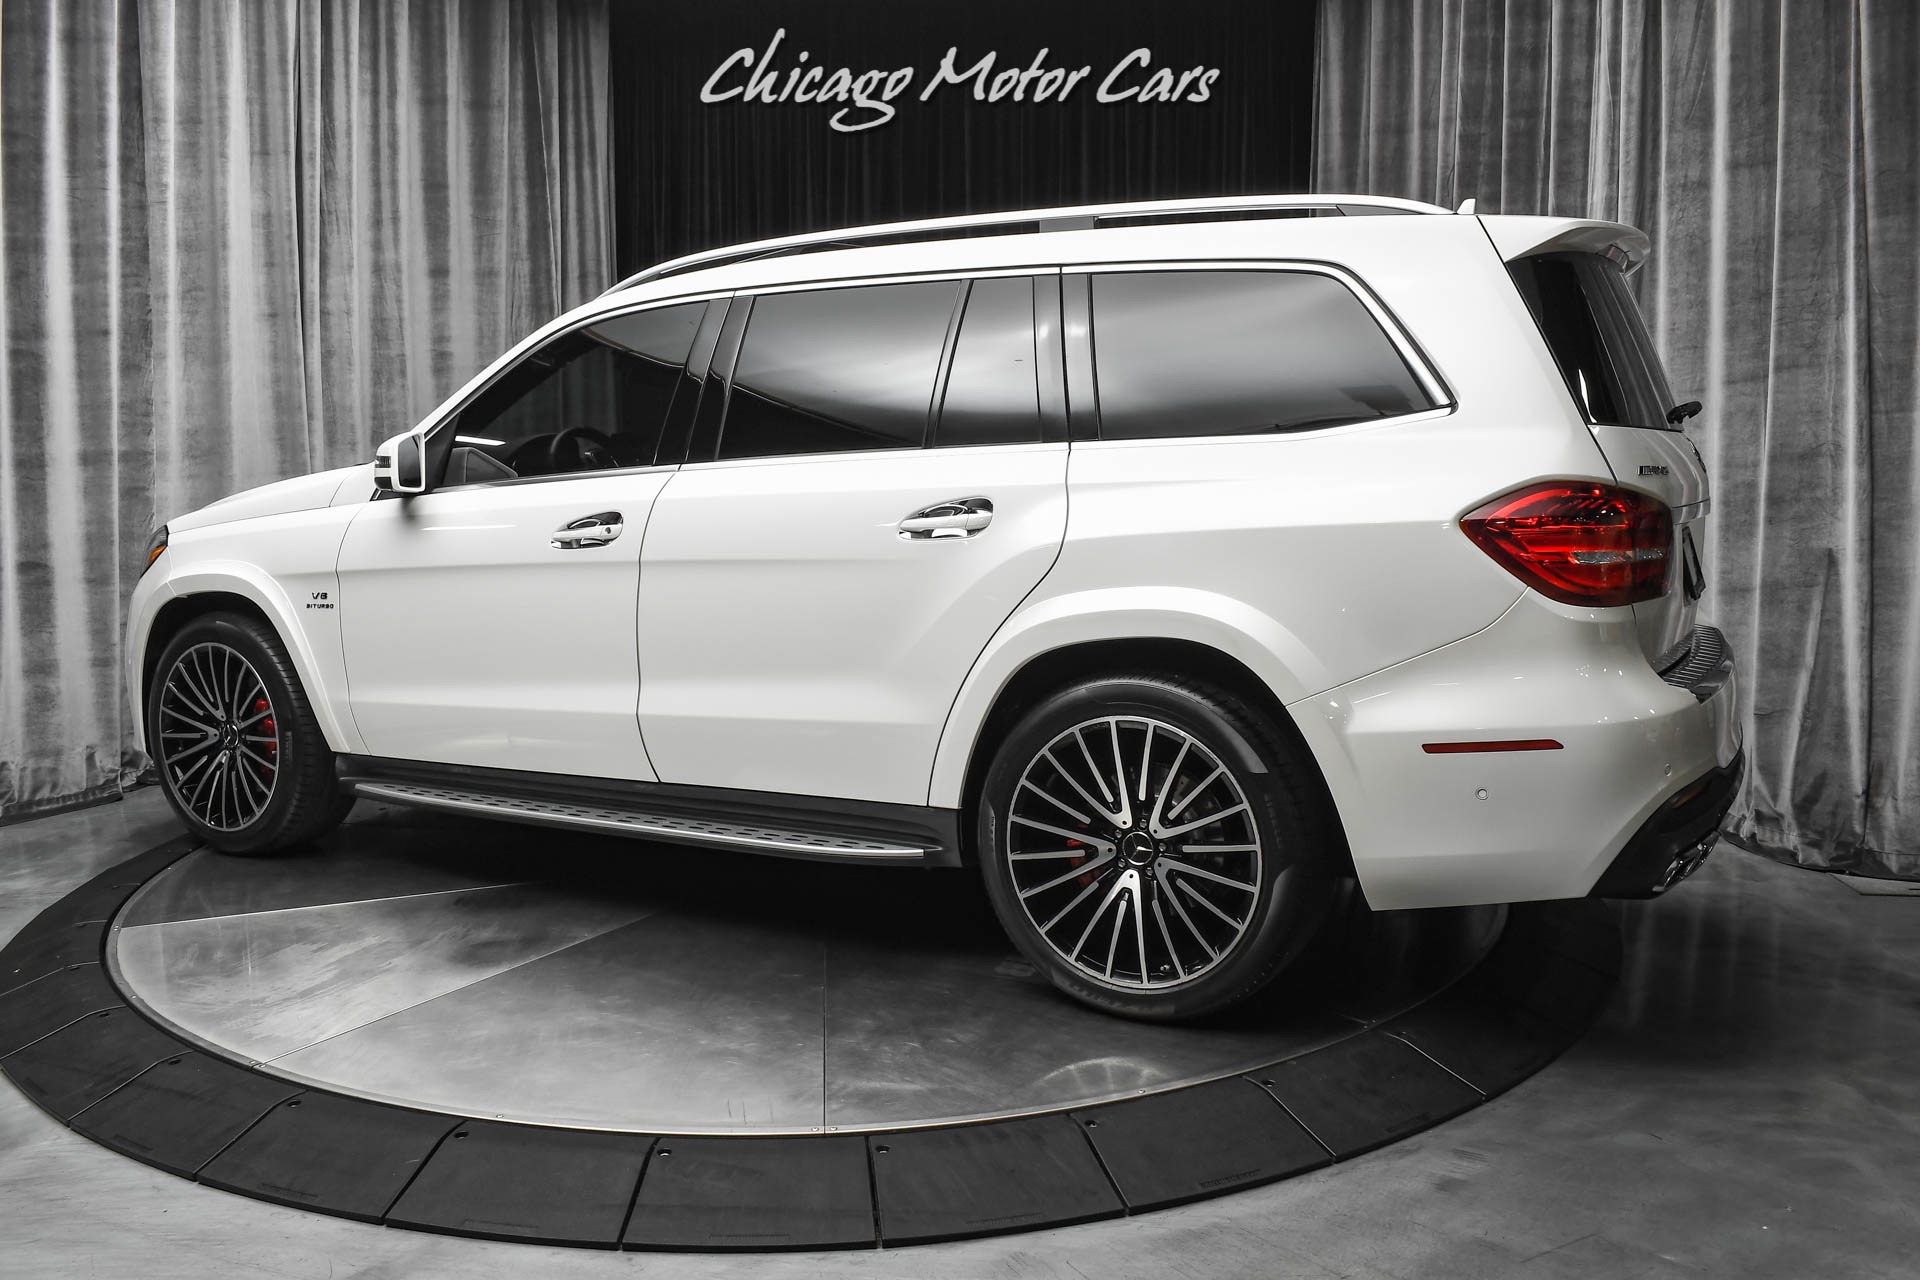 Used-2017-Mercedes-Benz-GLS63-AMG-131k-MSRP-Loaded-with-Options-LOW-Miles-Rear-Entertainment